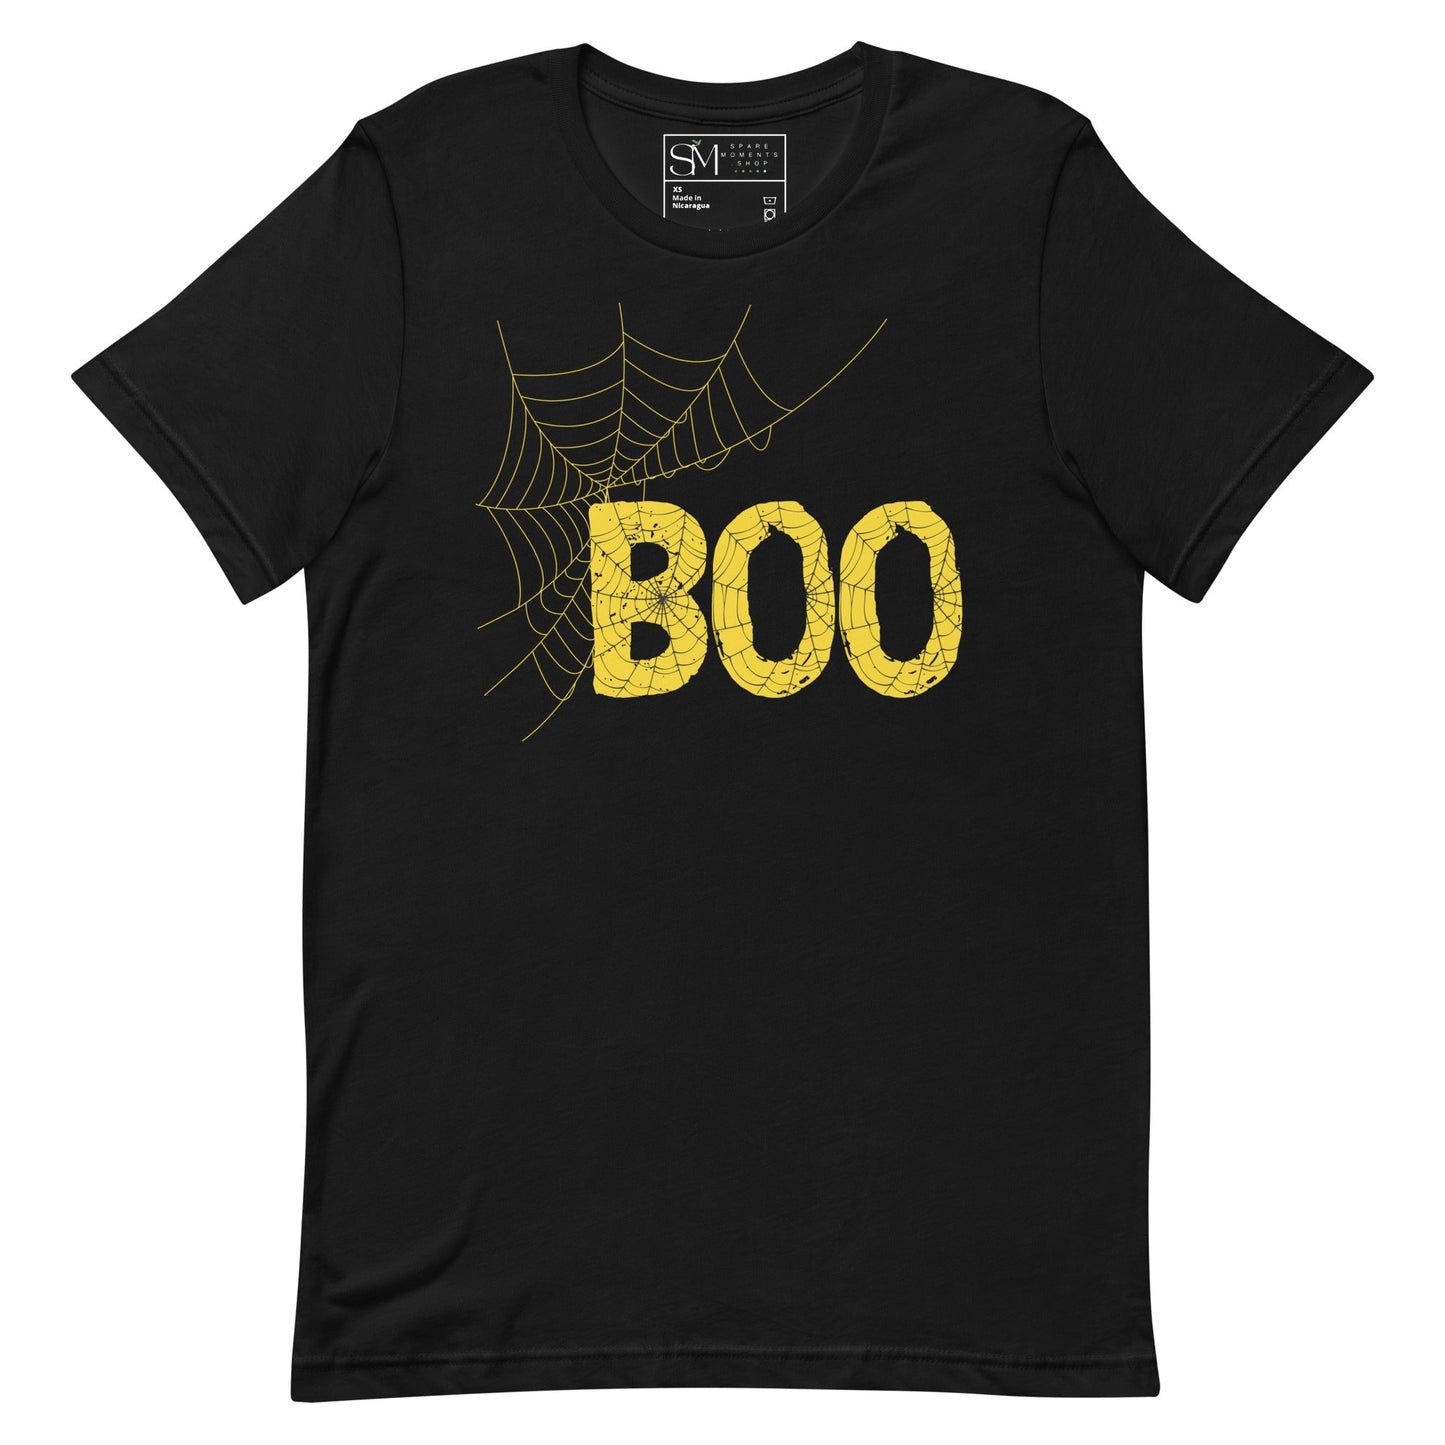 Ghost T-Shirt | Graphic Halloween Tees